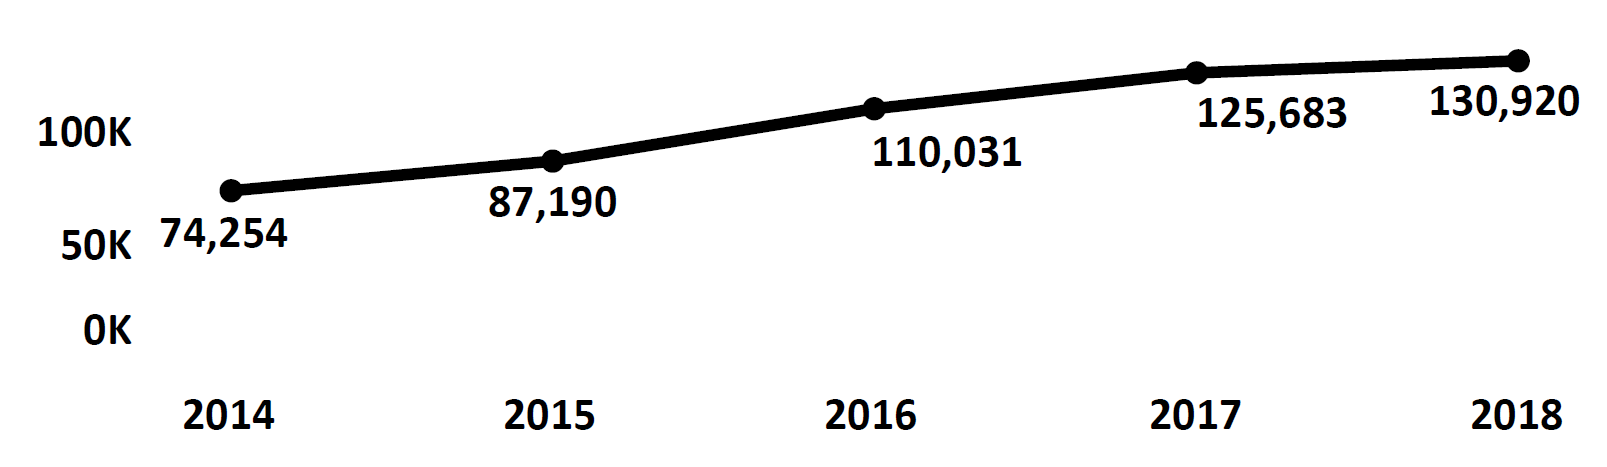 Graph of Do Not Call complaints recorded in Washington from fiscal year 2014 to fiscal year 2018. In 2014 there were 74,254 complaints filed, which increased each year. In 2018 there were 130,920 complaints filed.